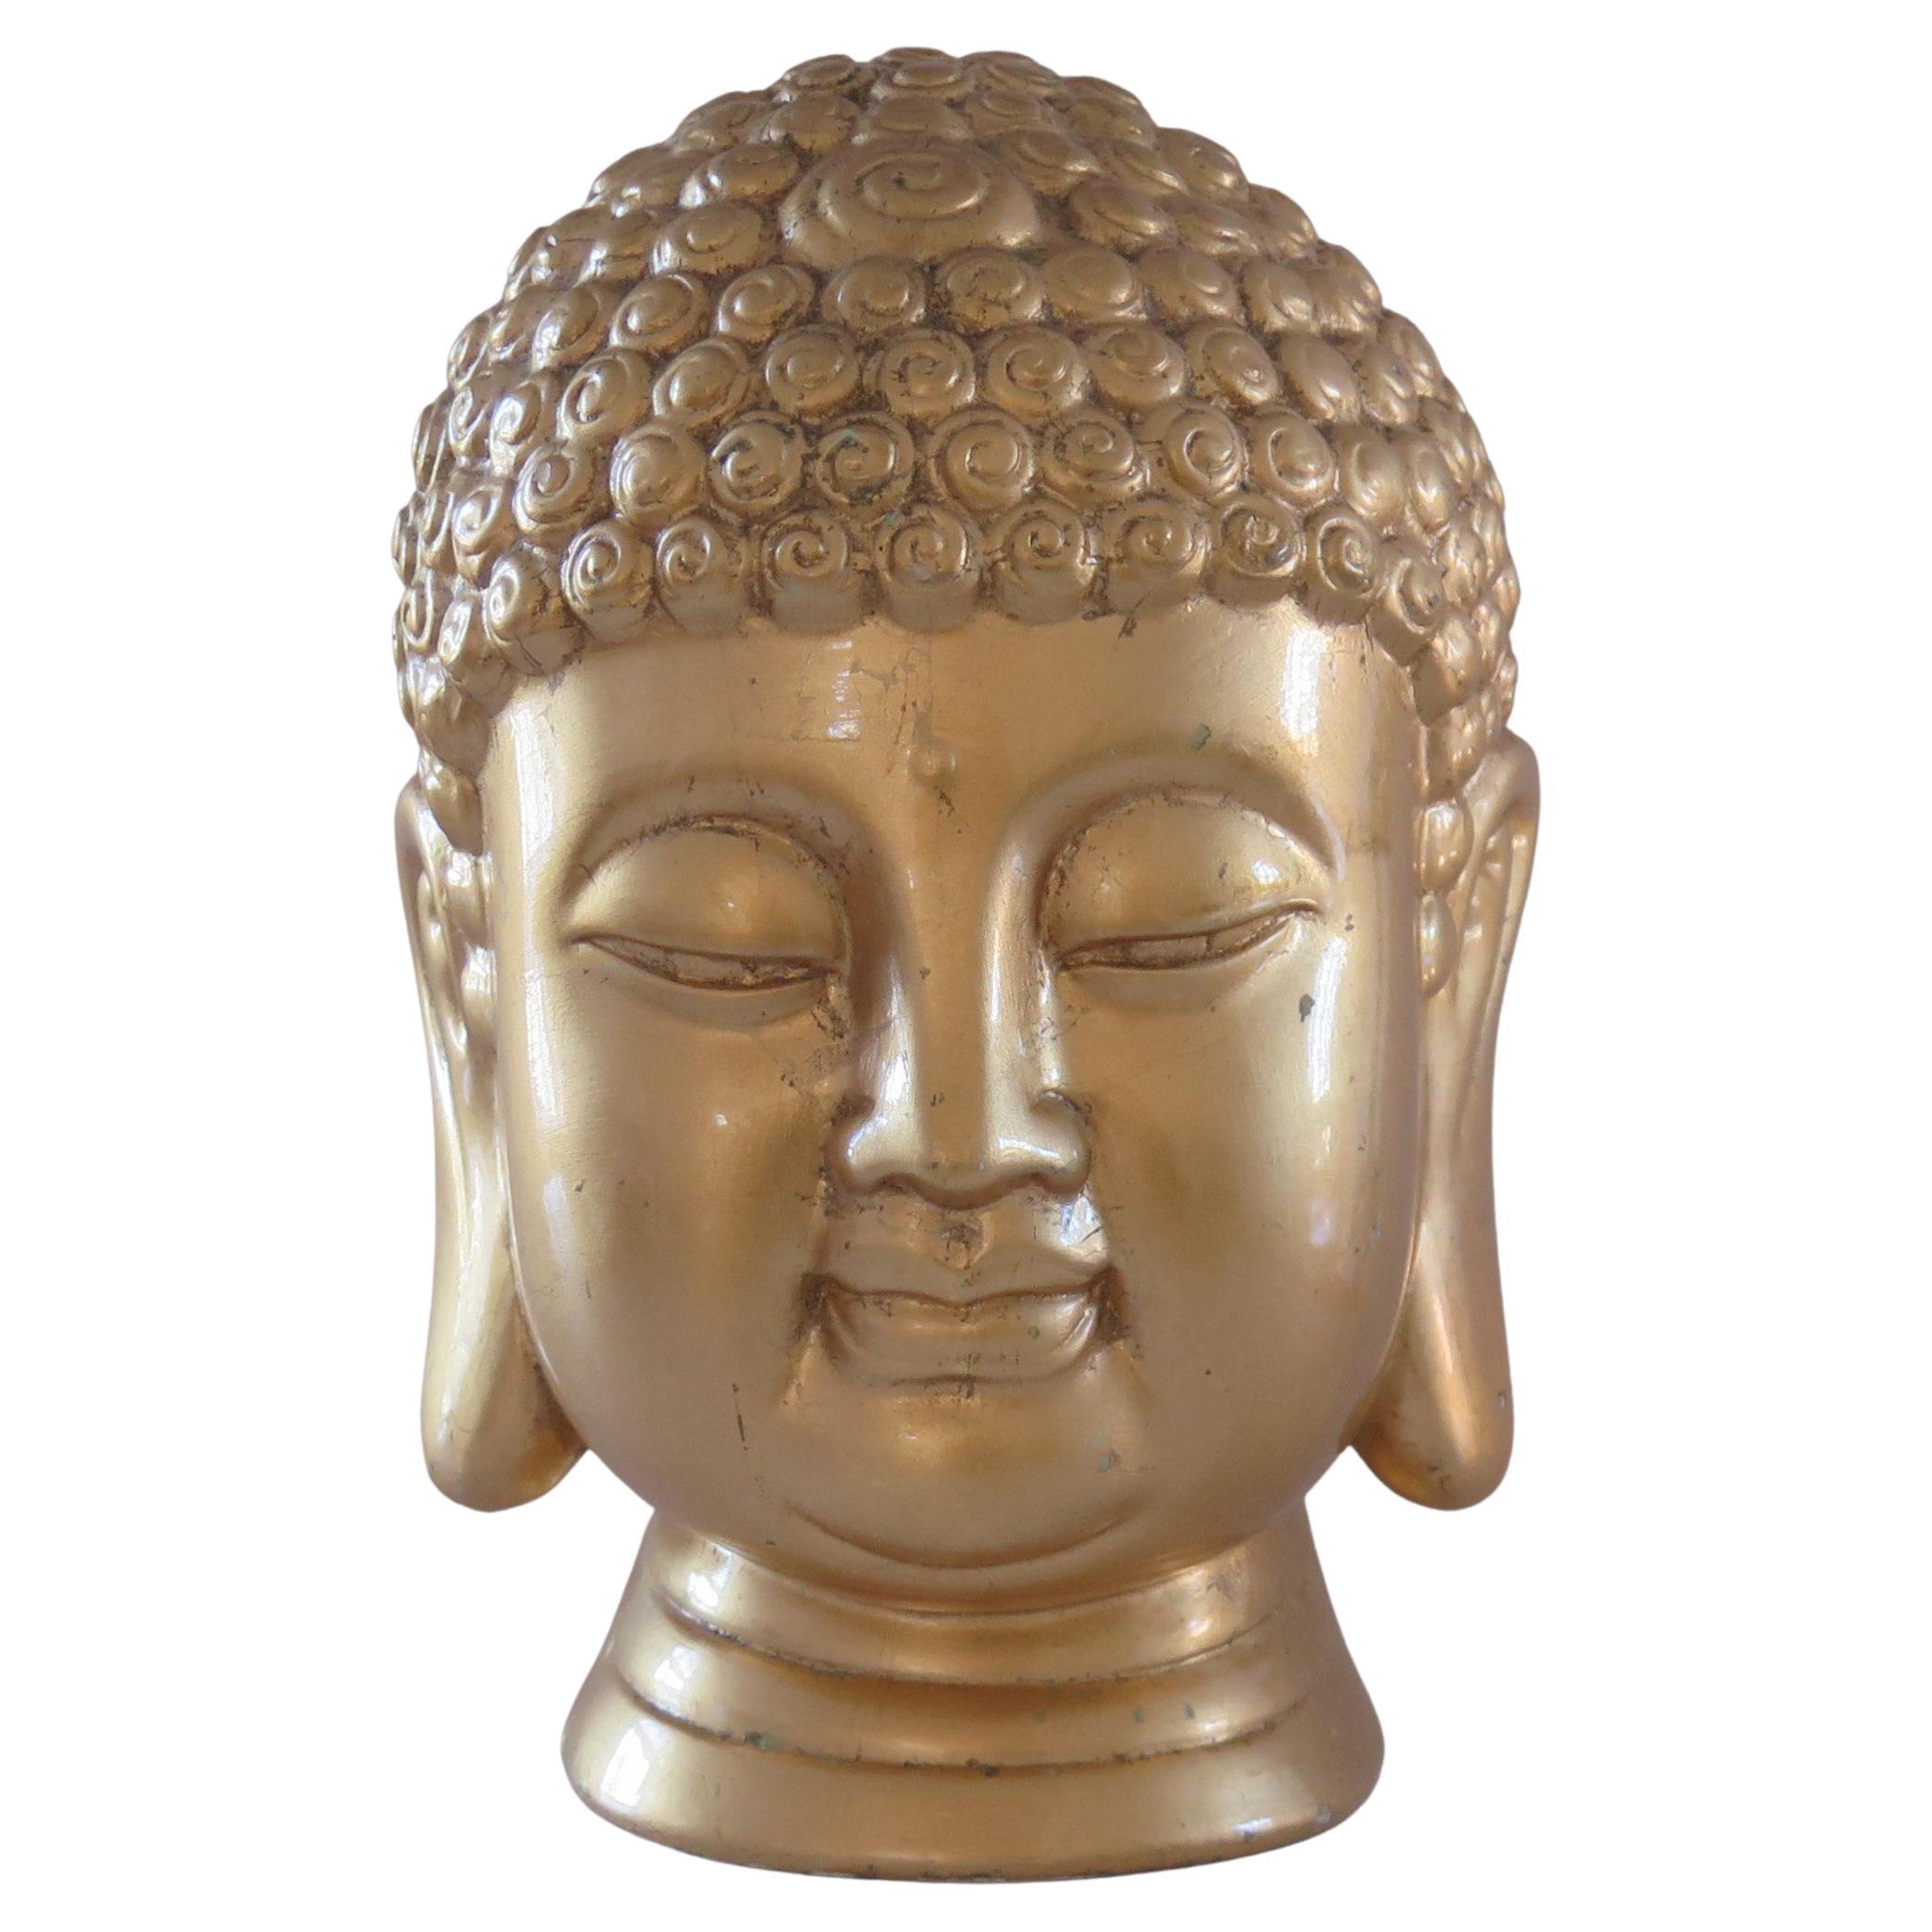 Large Ceramic Buddha Head or Bust with Real Gold Leaf, Asian Circa 1920s